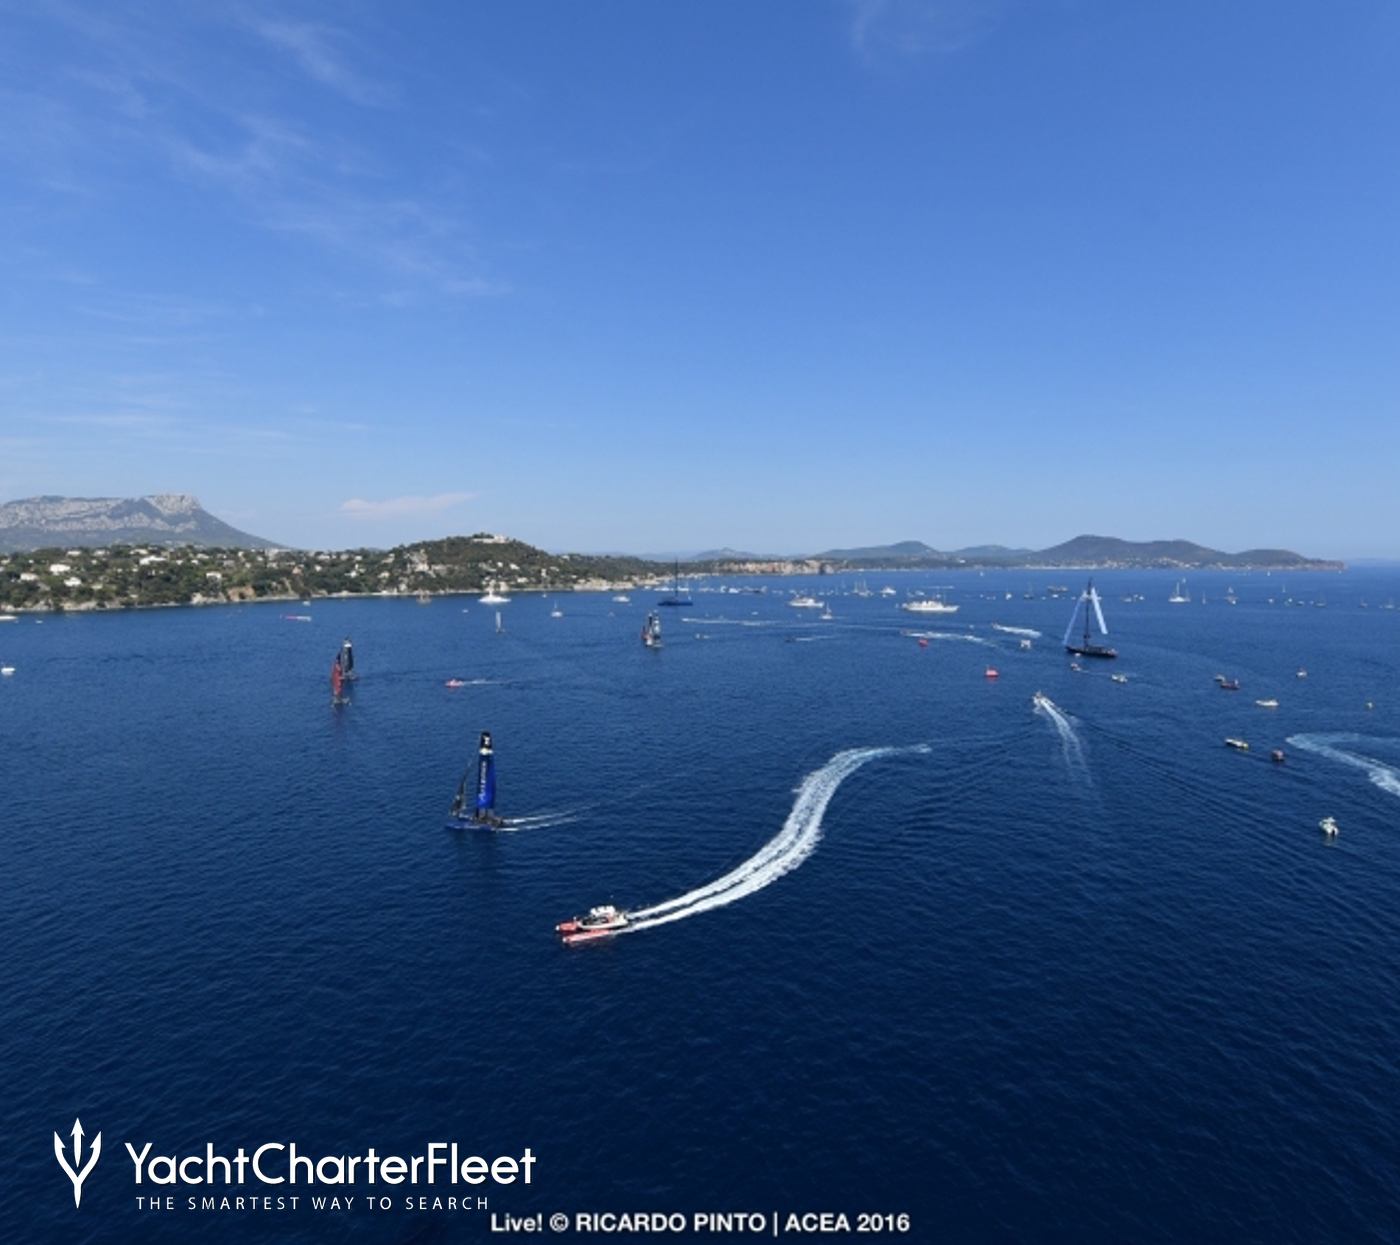 ASIA'S FIRST AMERICA'S CUP RACING EVENT: THE LOUIS VUITTON